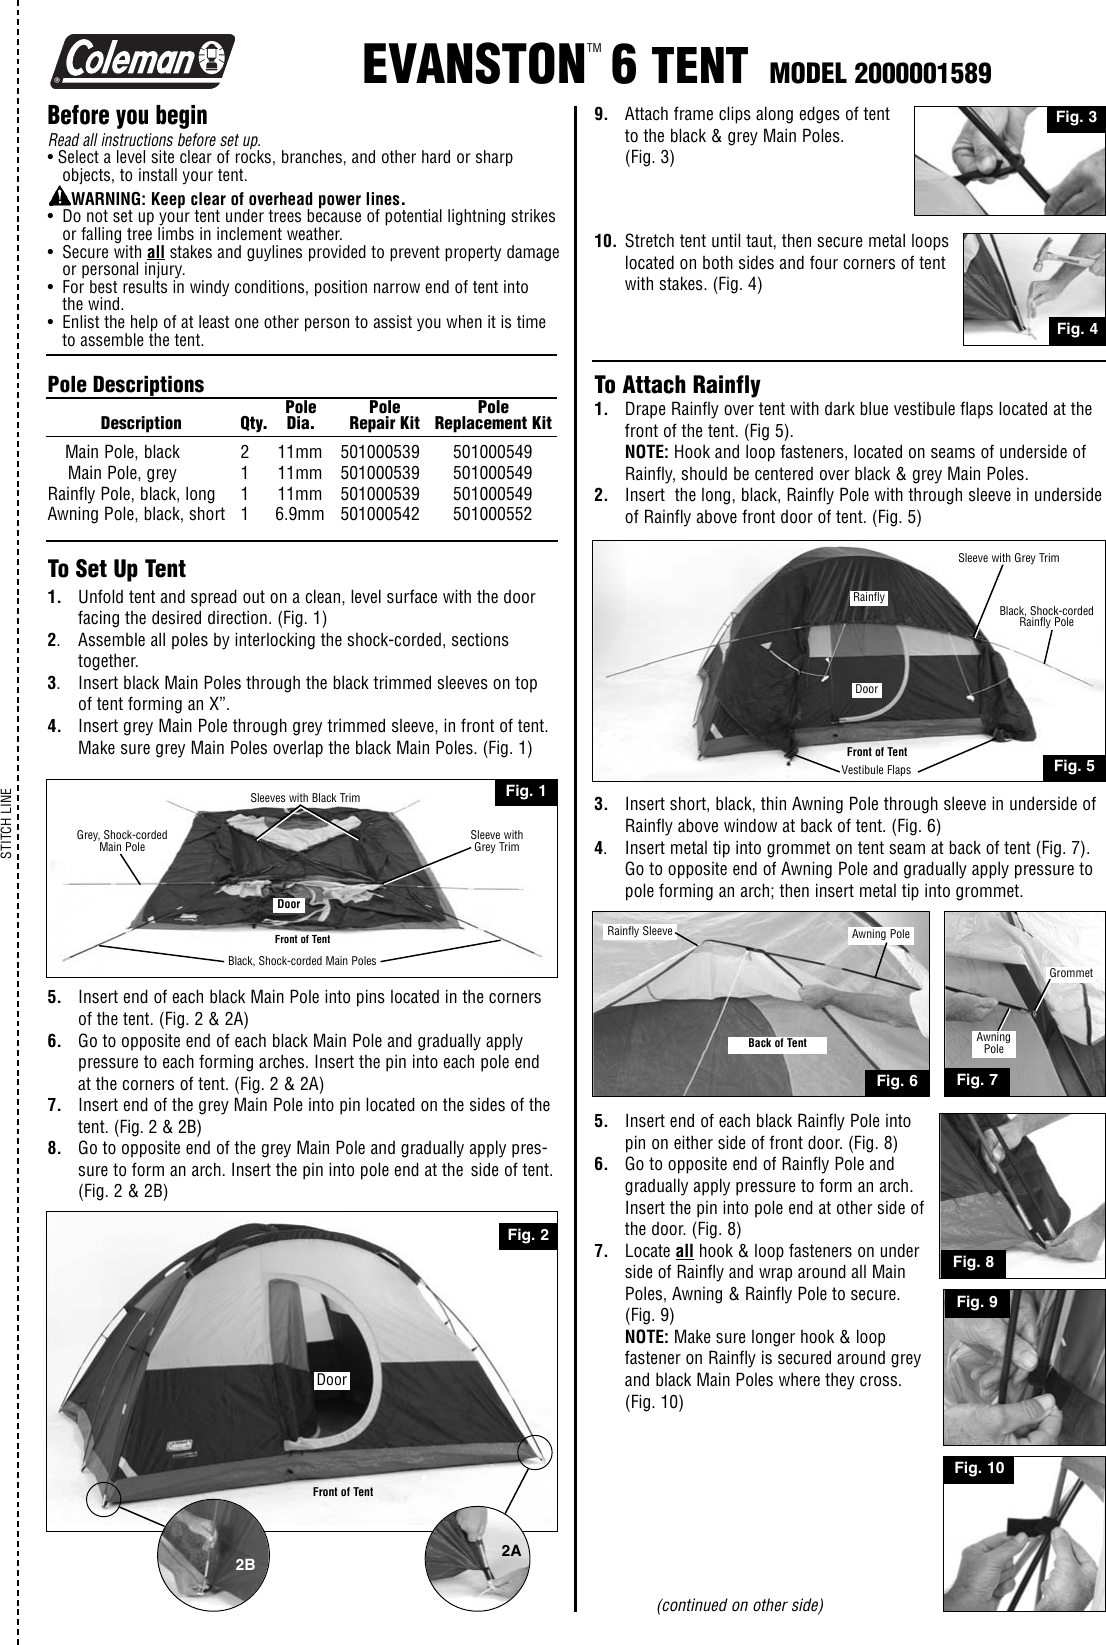 Page 1 of 2 - Coleman Coleman-2000001589-Users-Manual- Evanston 6 Tent 2000001589  Coleman-2000001589-users-manual